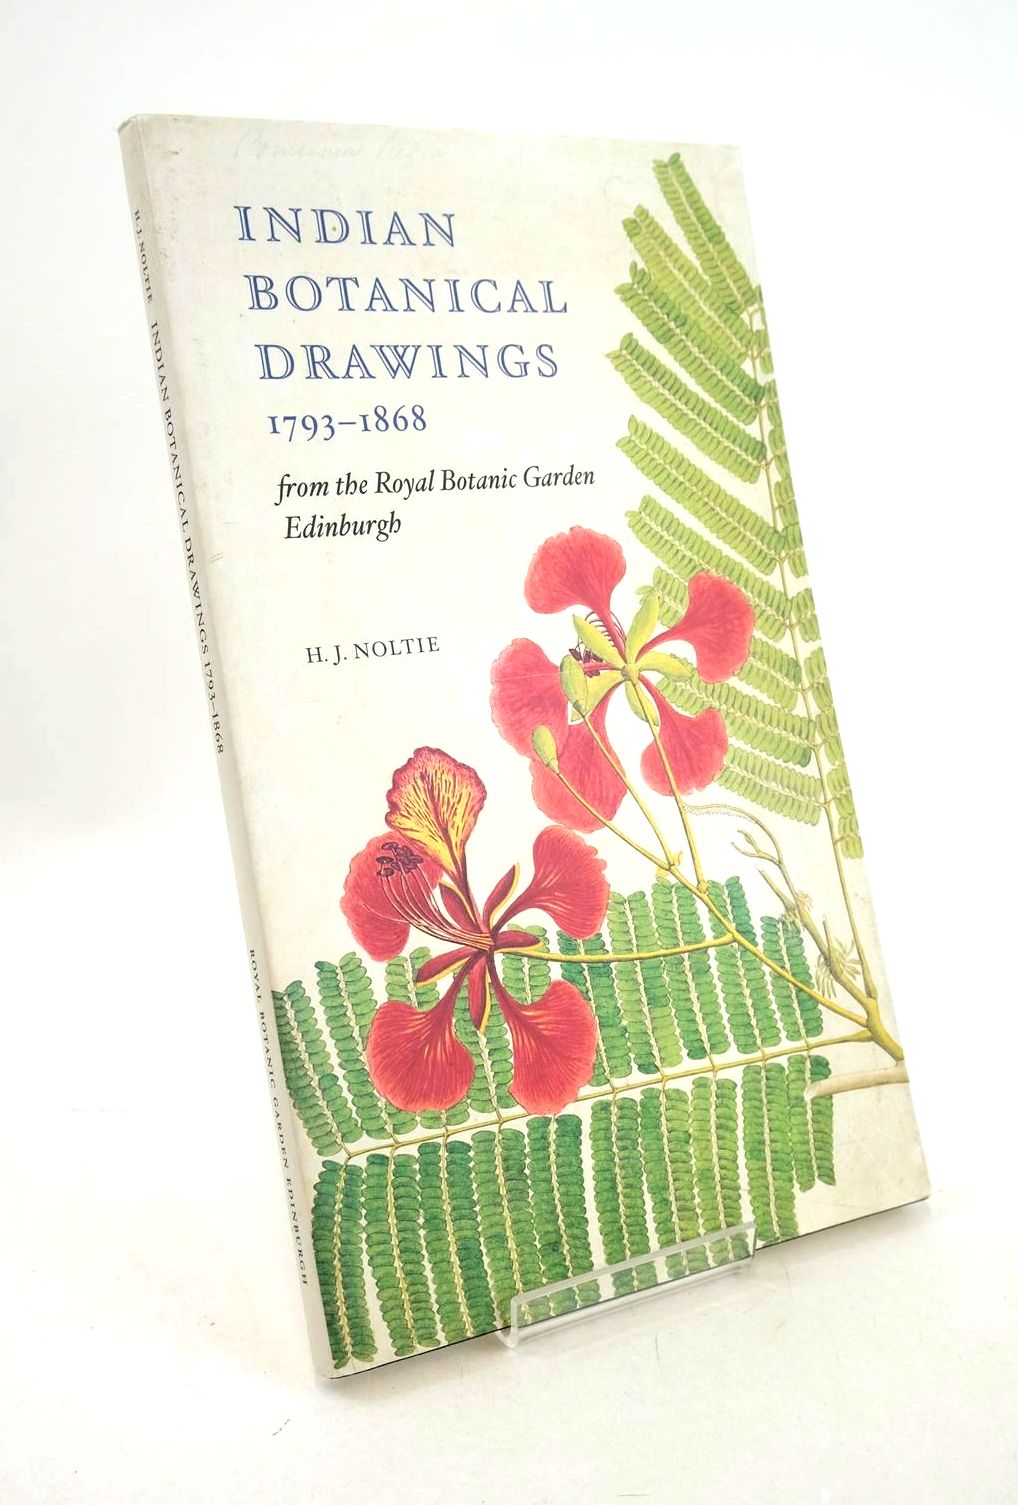 Photo of INDIAN BOTANICAL DRAWINGS 1793-1868 written by Noltie, Henry J. published by Royal Botanic Garden Edinburgh (STOCK CODE: 1326715)  for sale by Stella & Rose's Books